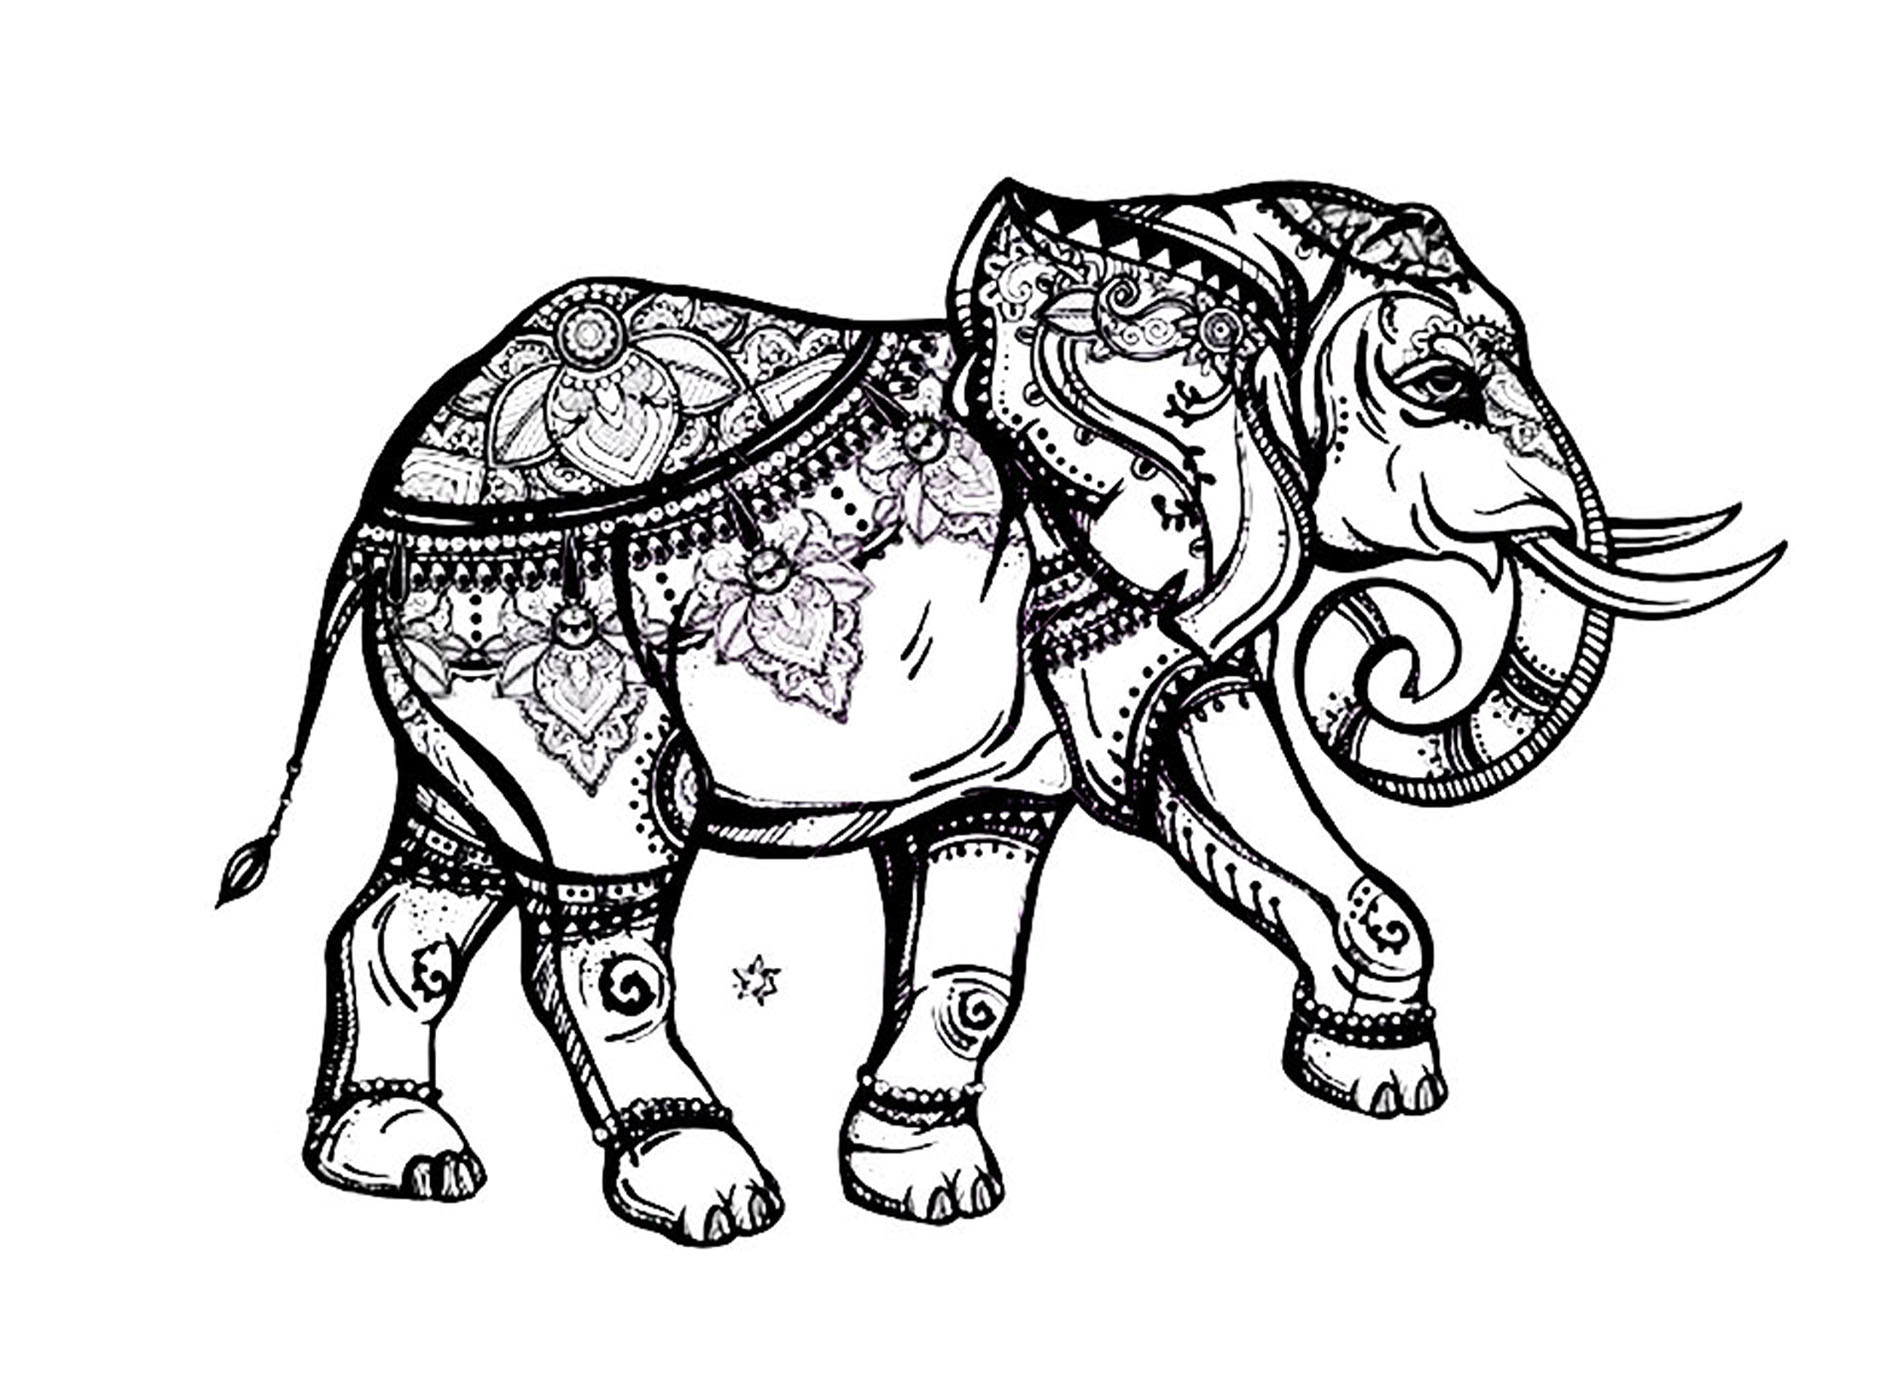 Download 23 Best Ideas Coloring Pages for Adults Elephant - Best ...